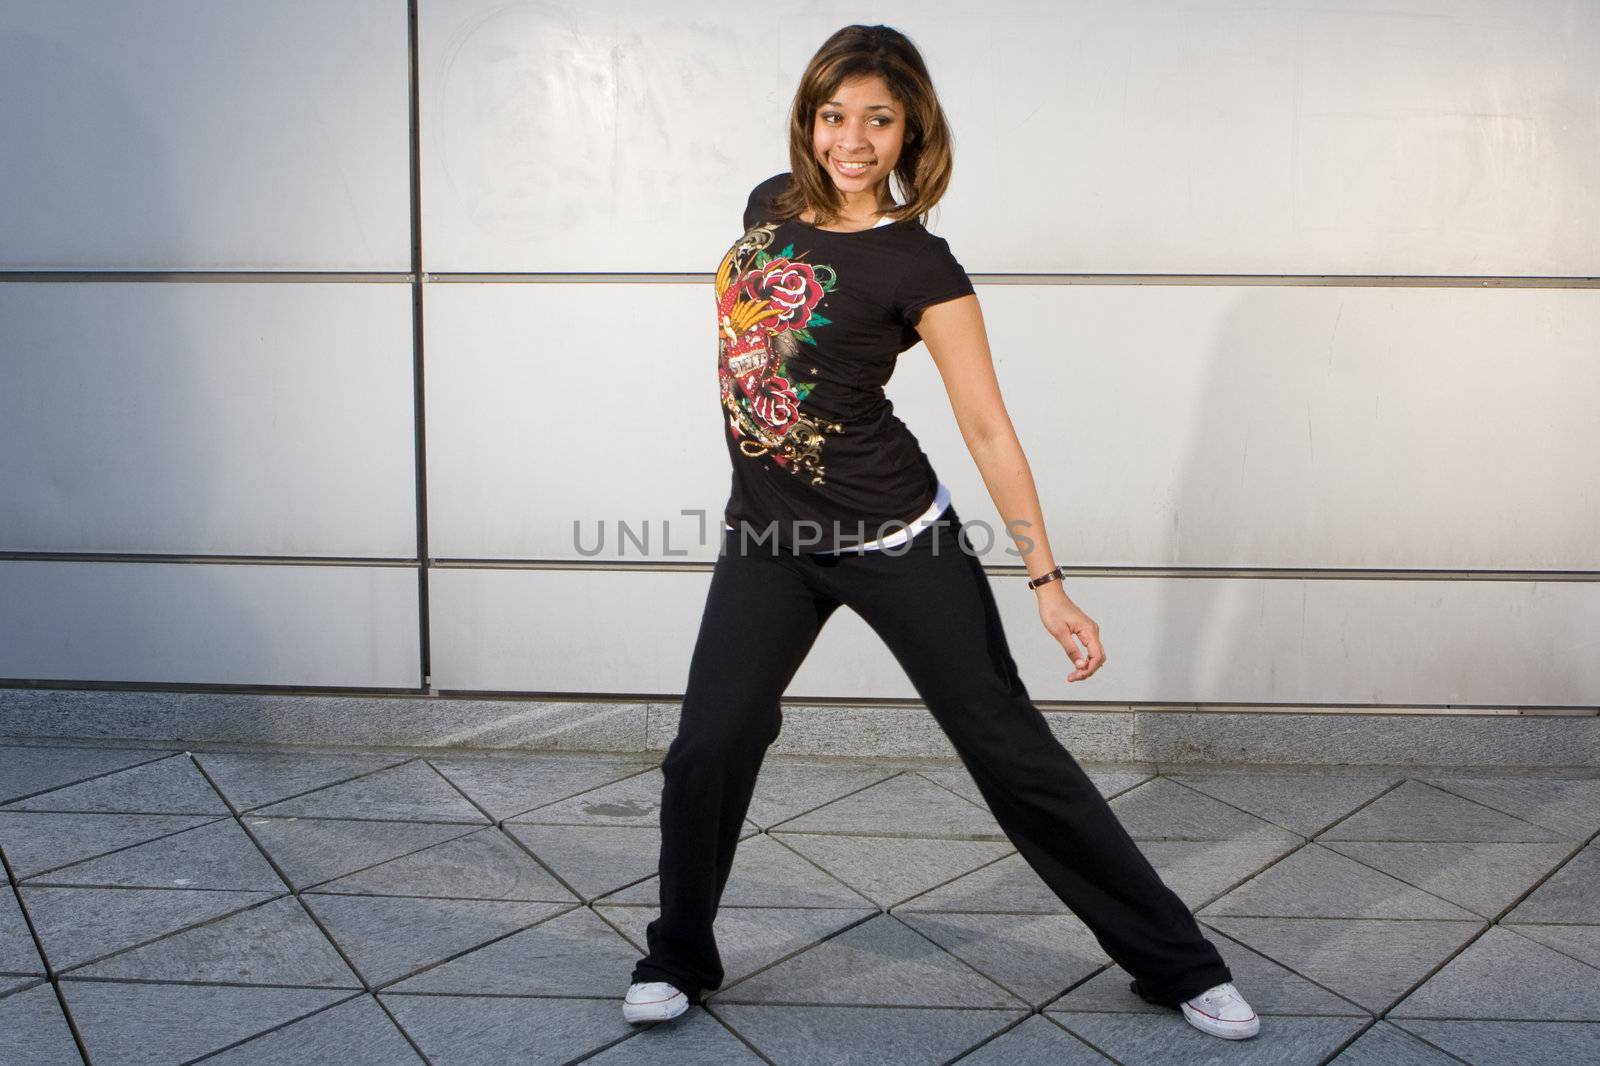 Young teenager grooving to hip hop music on the dance floor